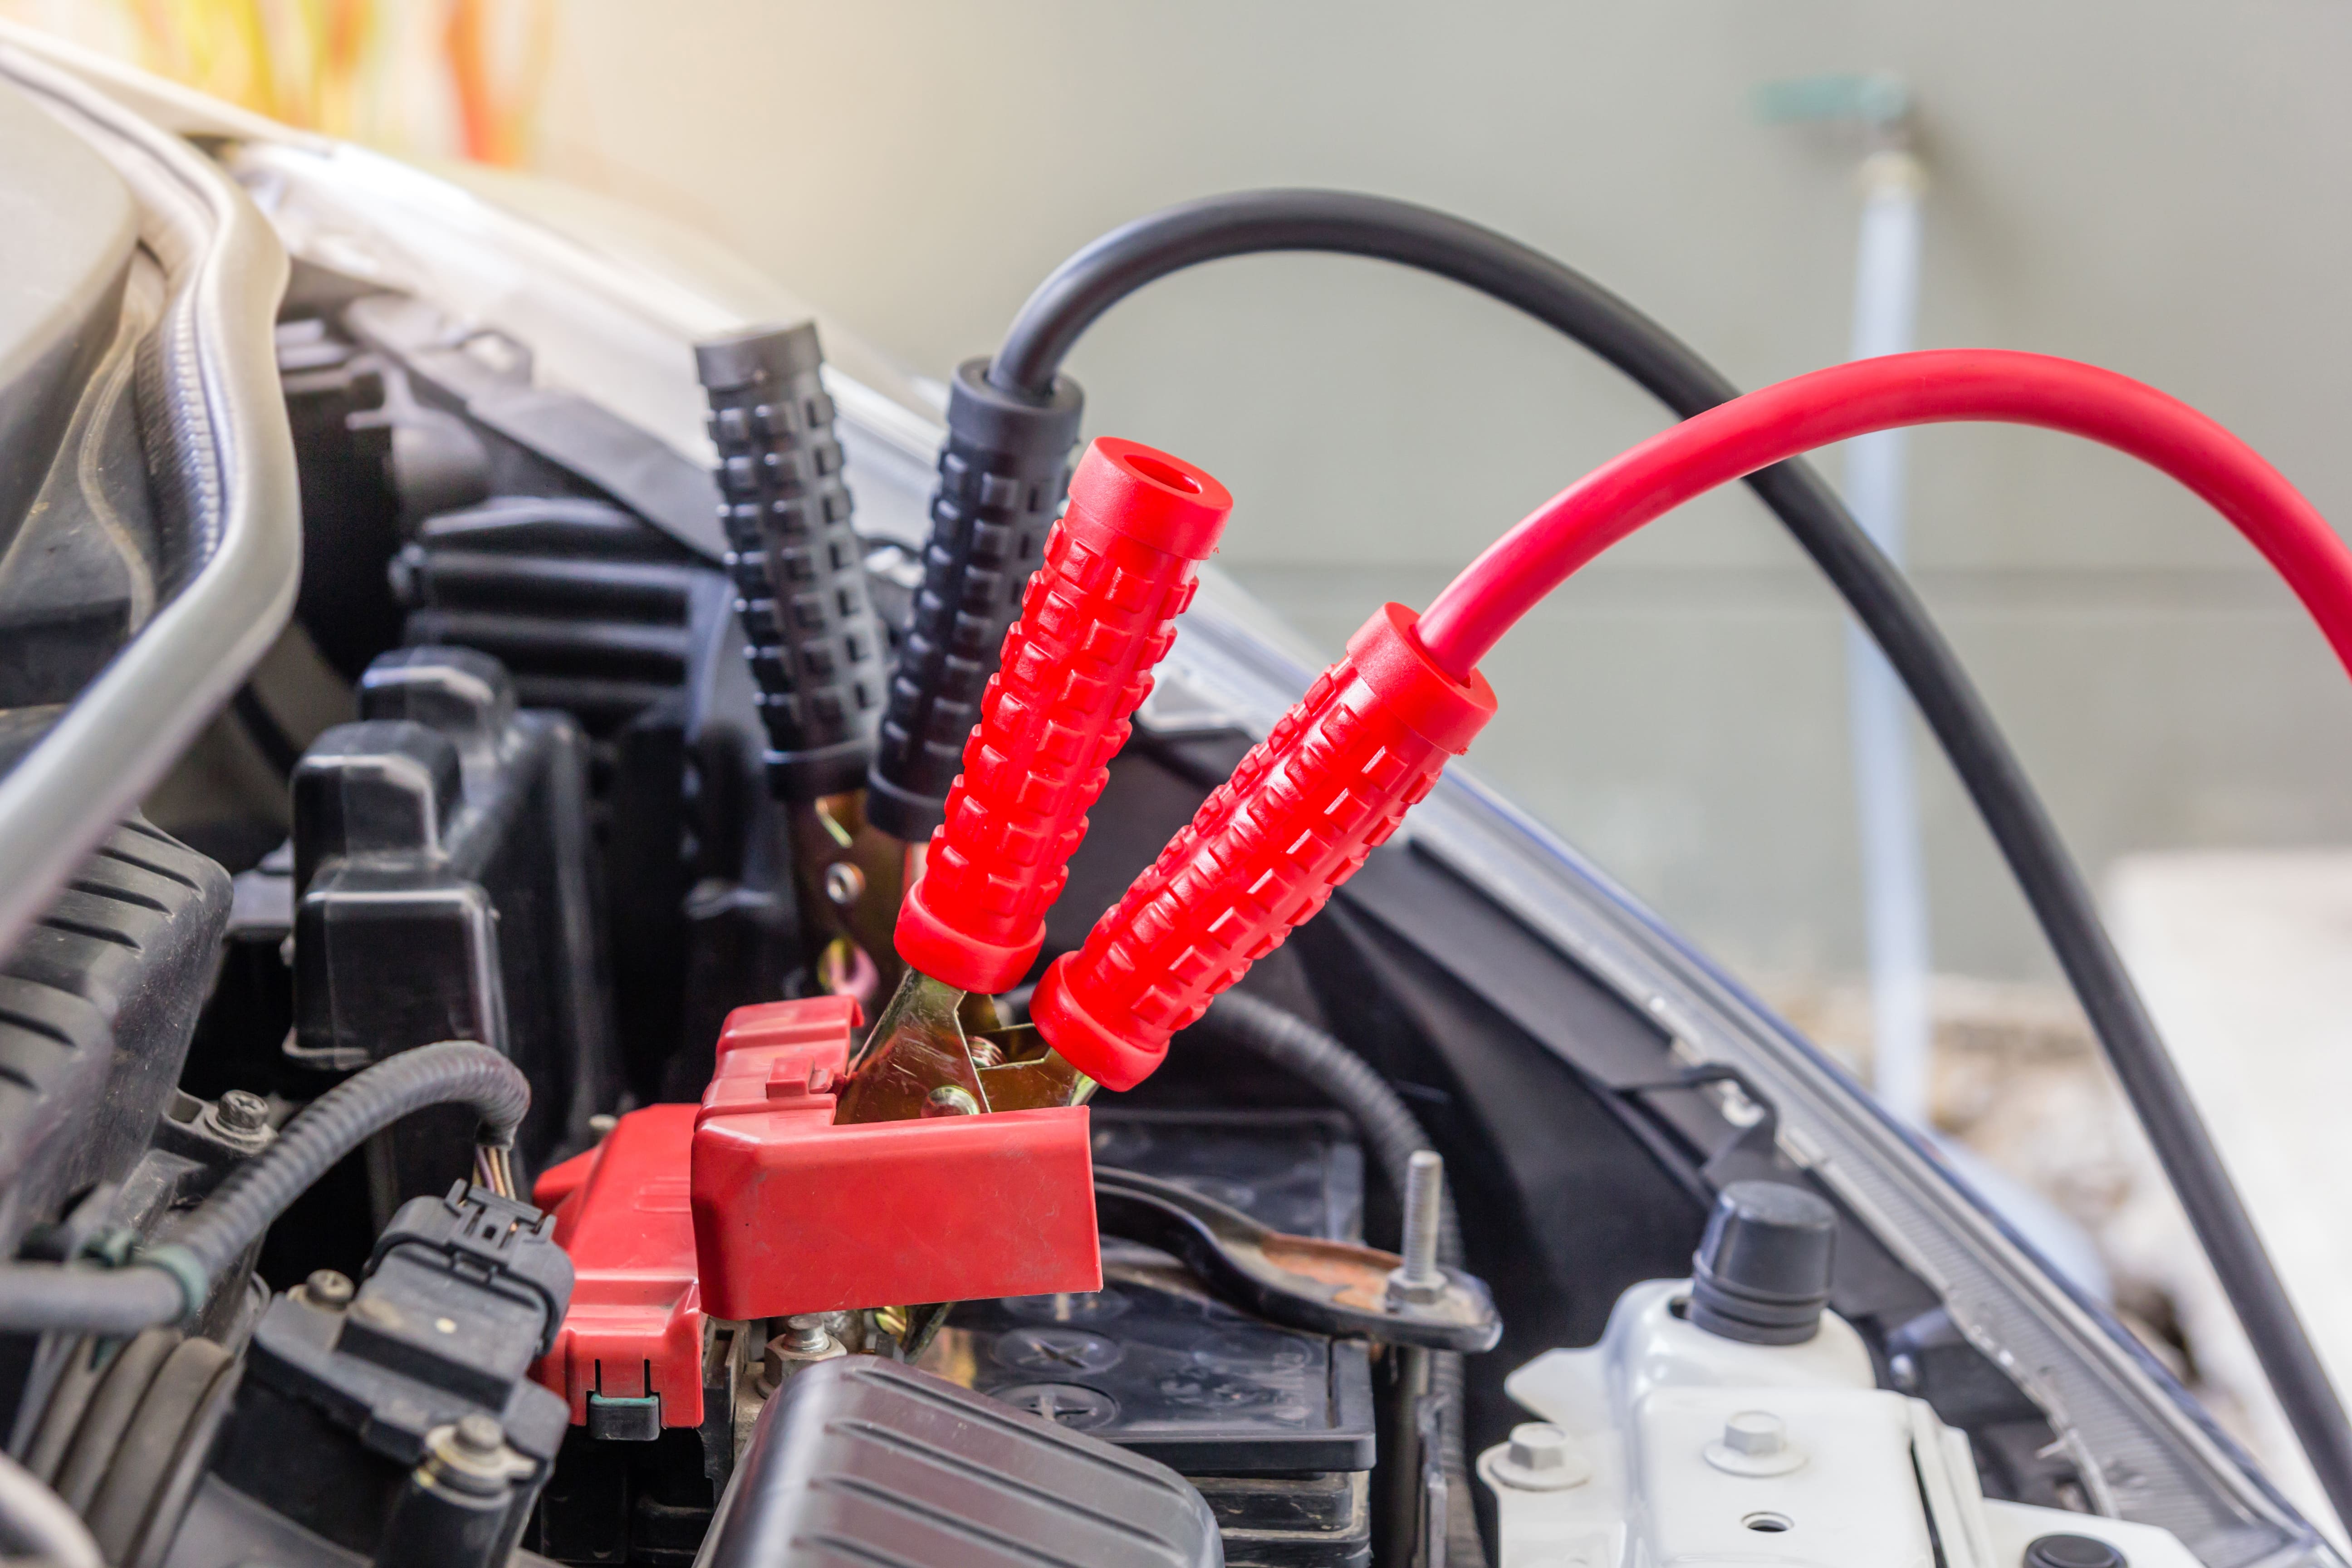 These recommended charging procedures can help you keep your battery operating at full power.